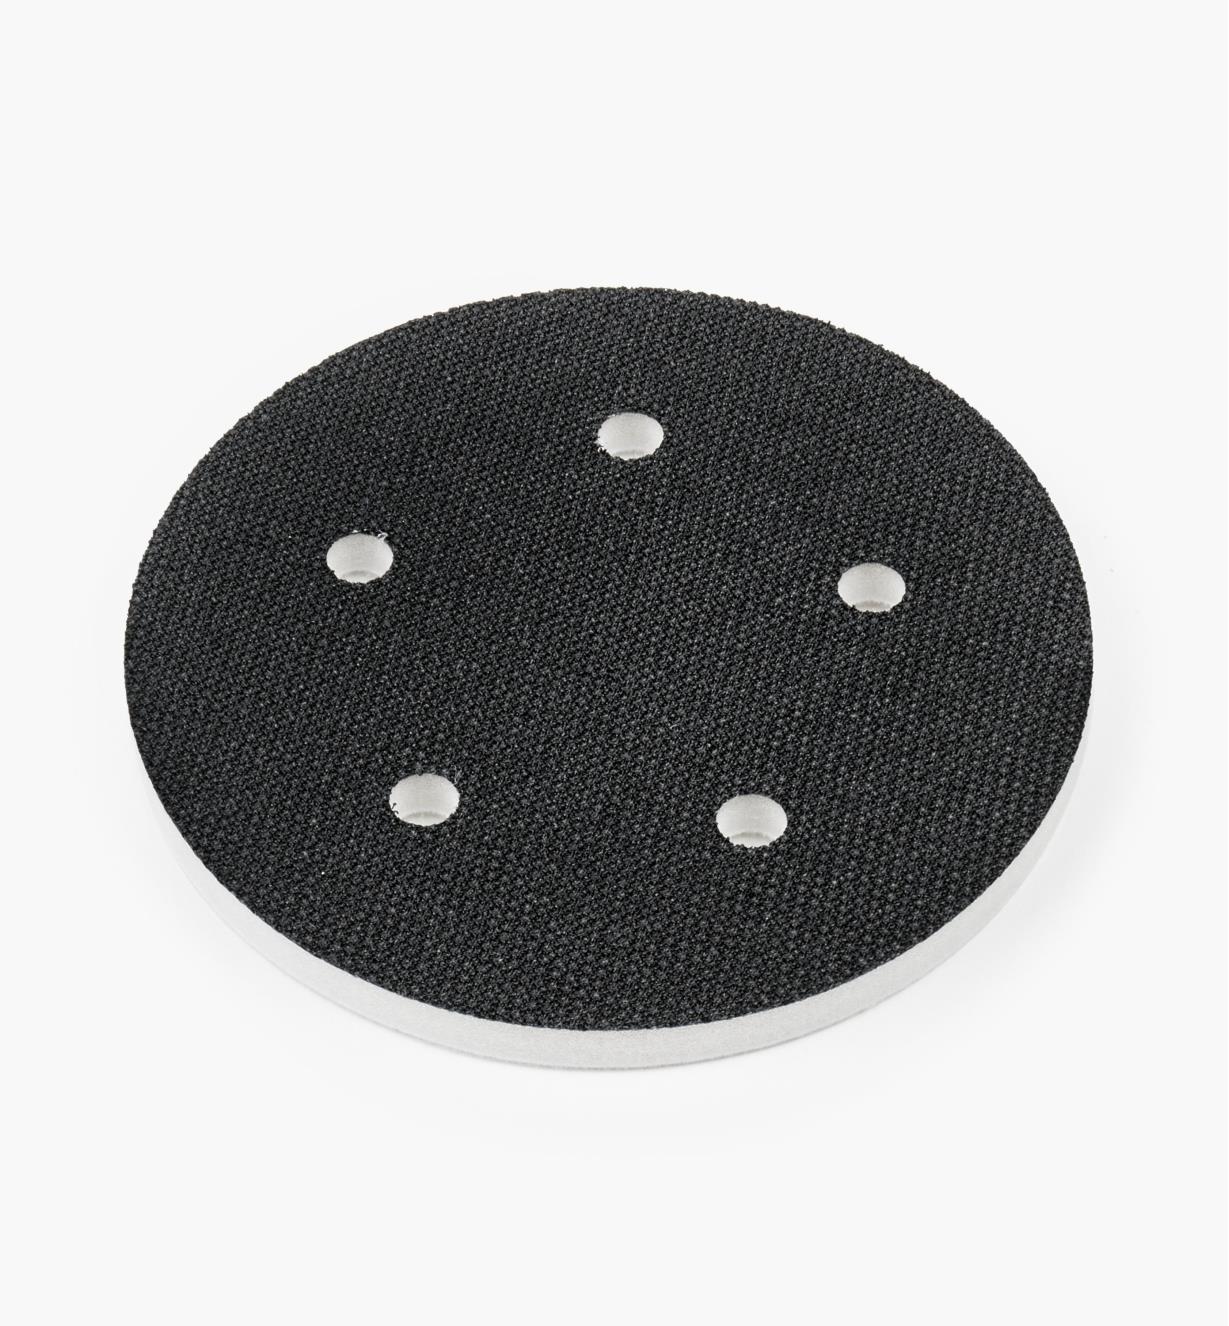 08K1121 - Five-Hole Grip-Faced Firm Interface Pad